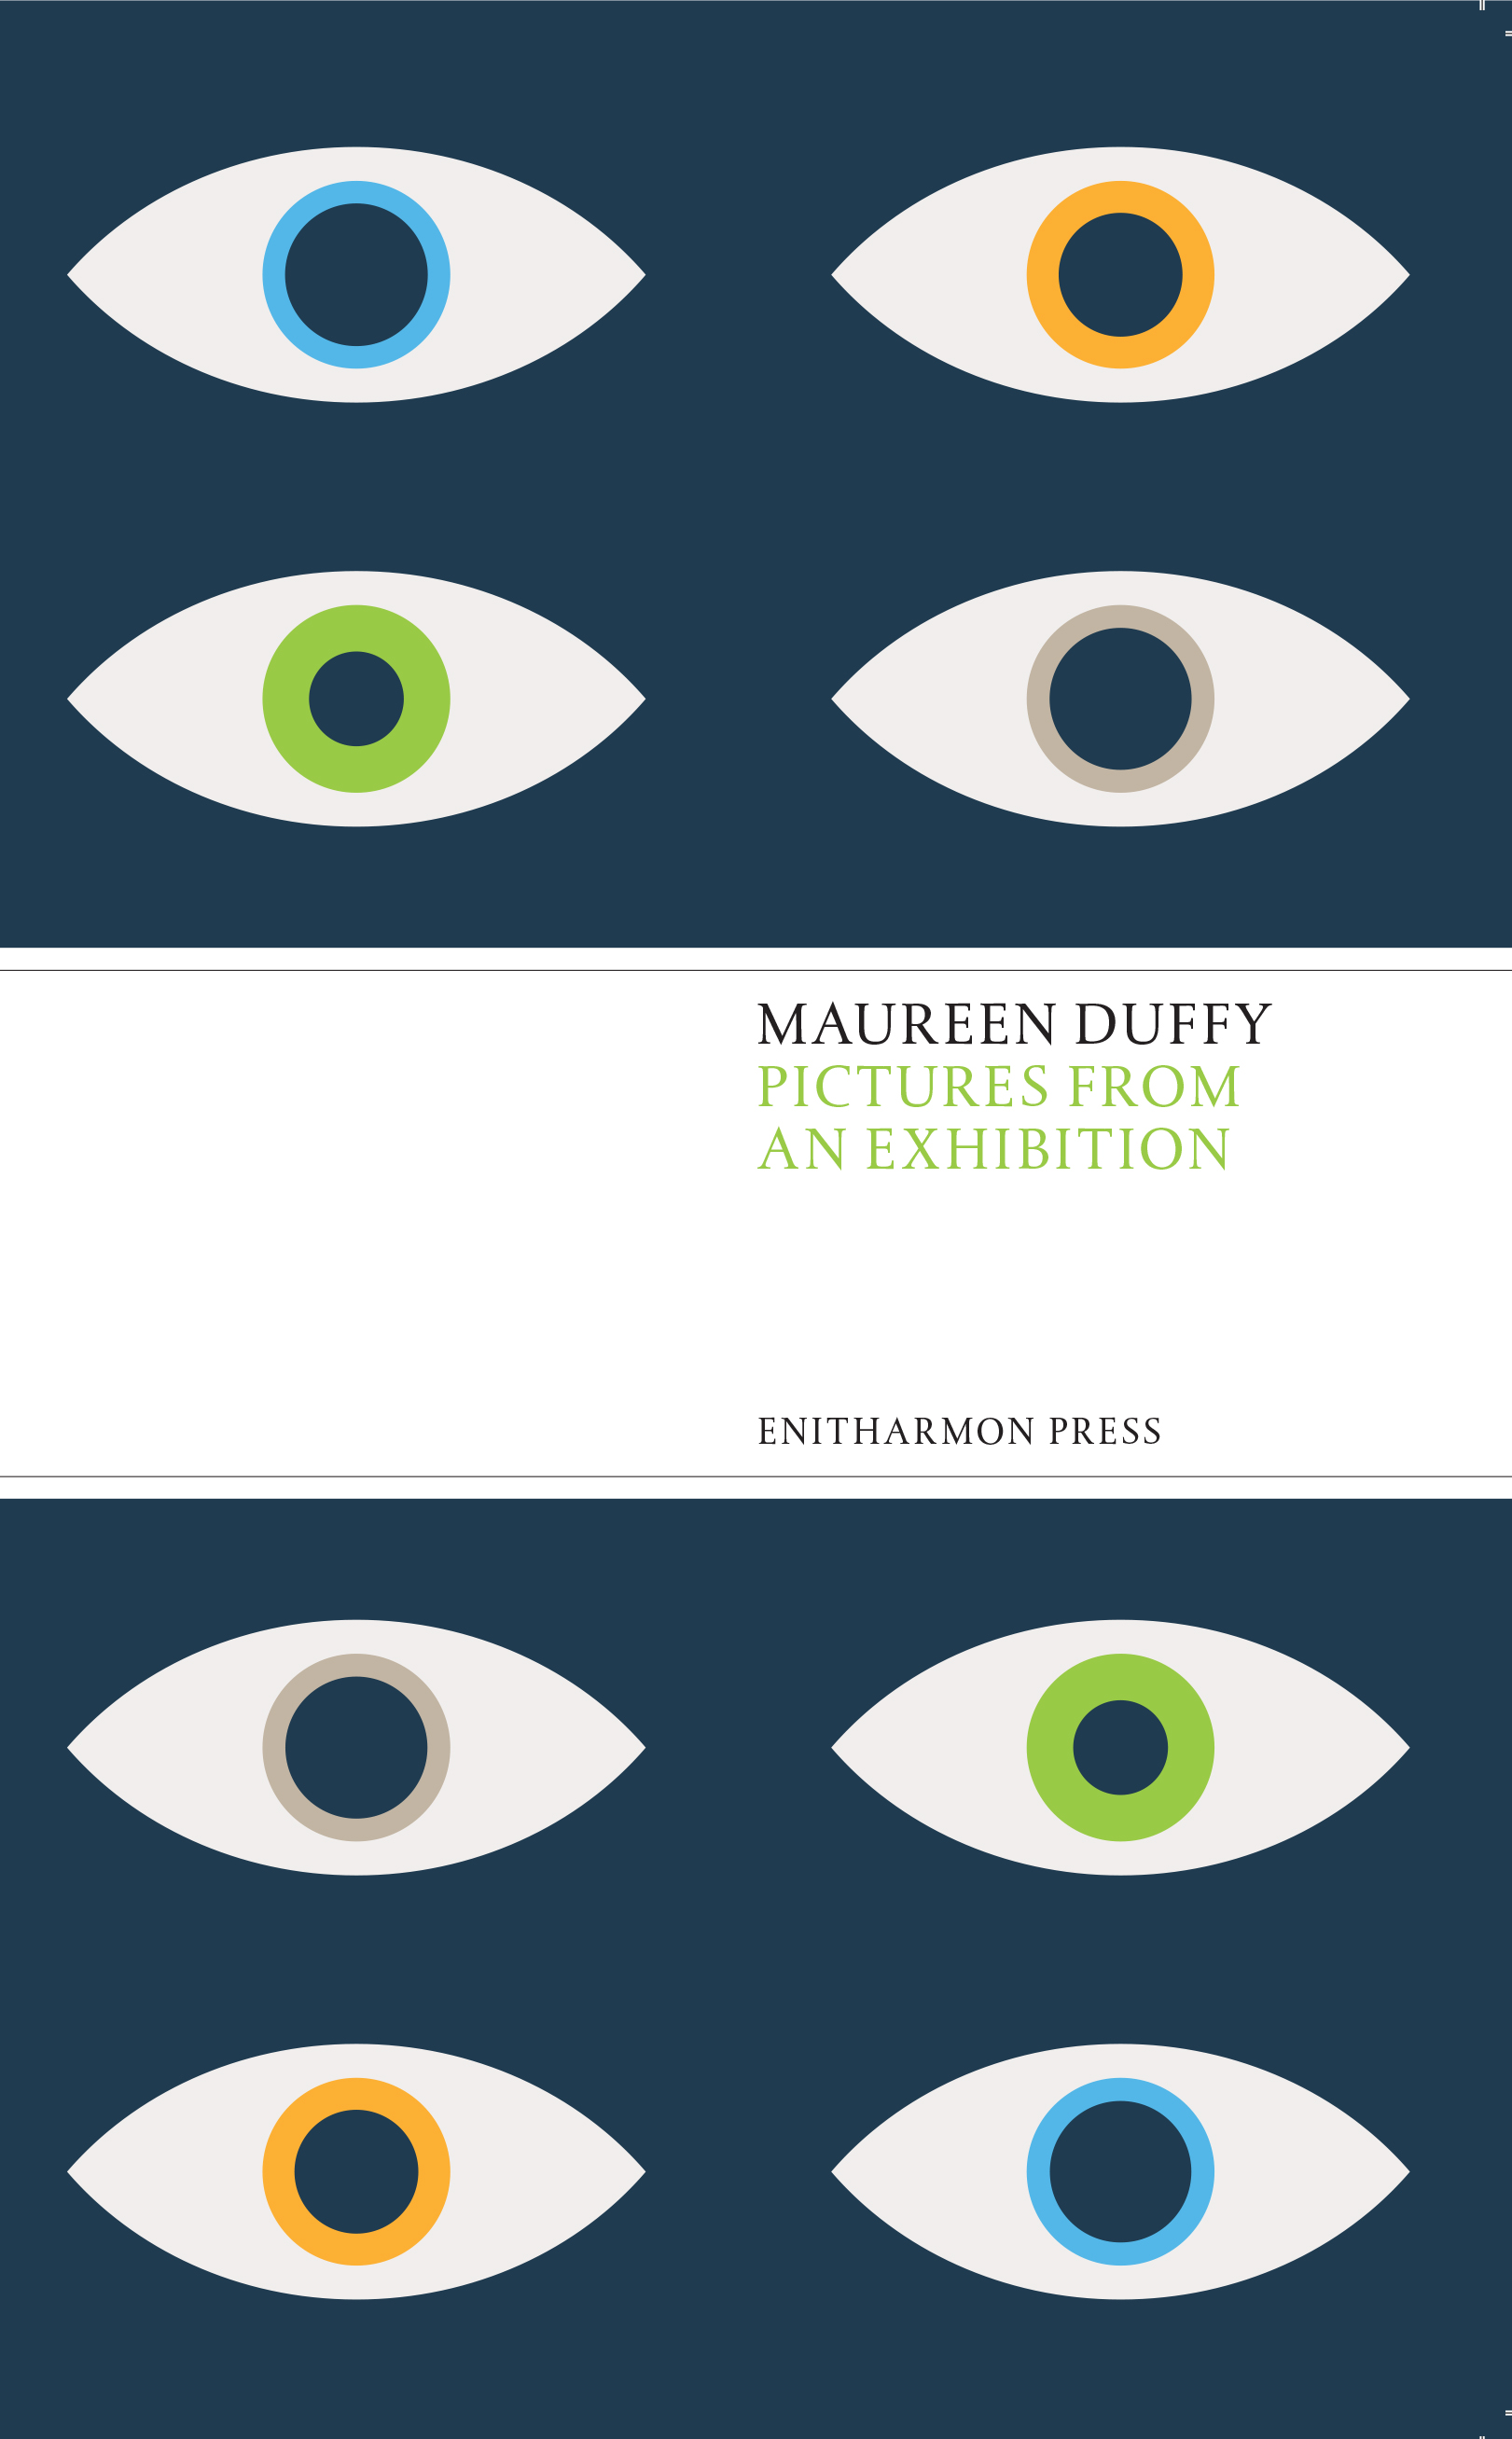 Cover - Pictures From an Exhibition - poetry collection published by Enitharmon Press in 2016